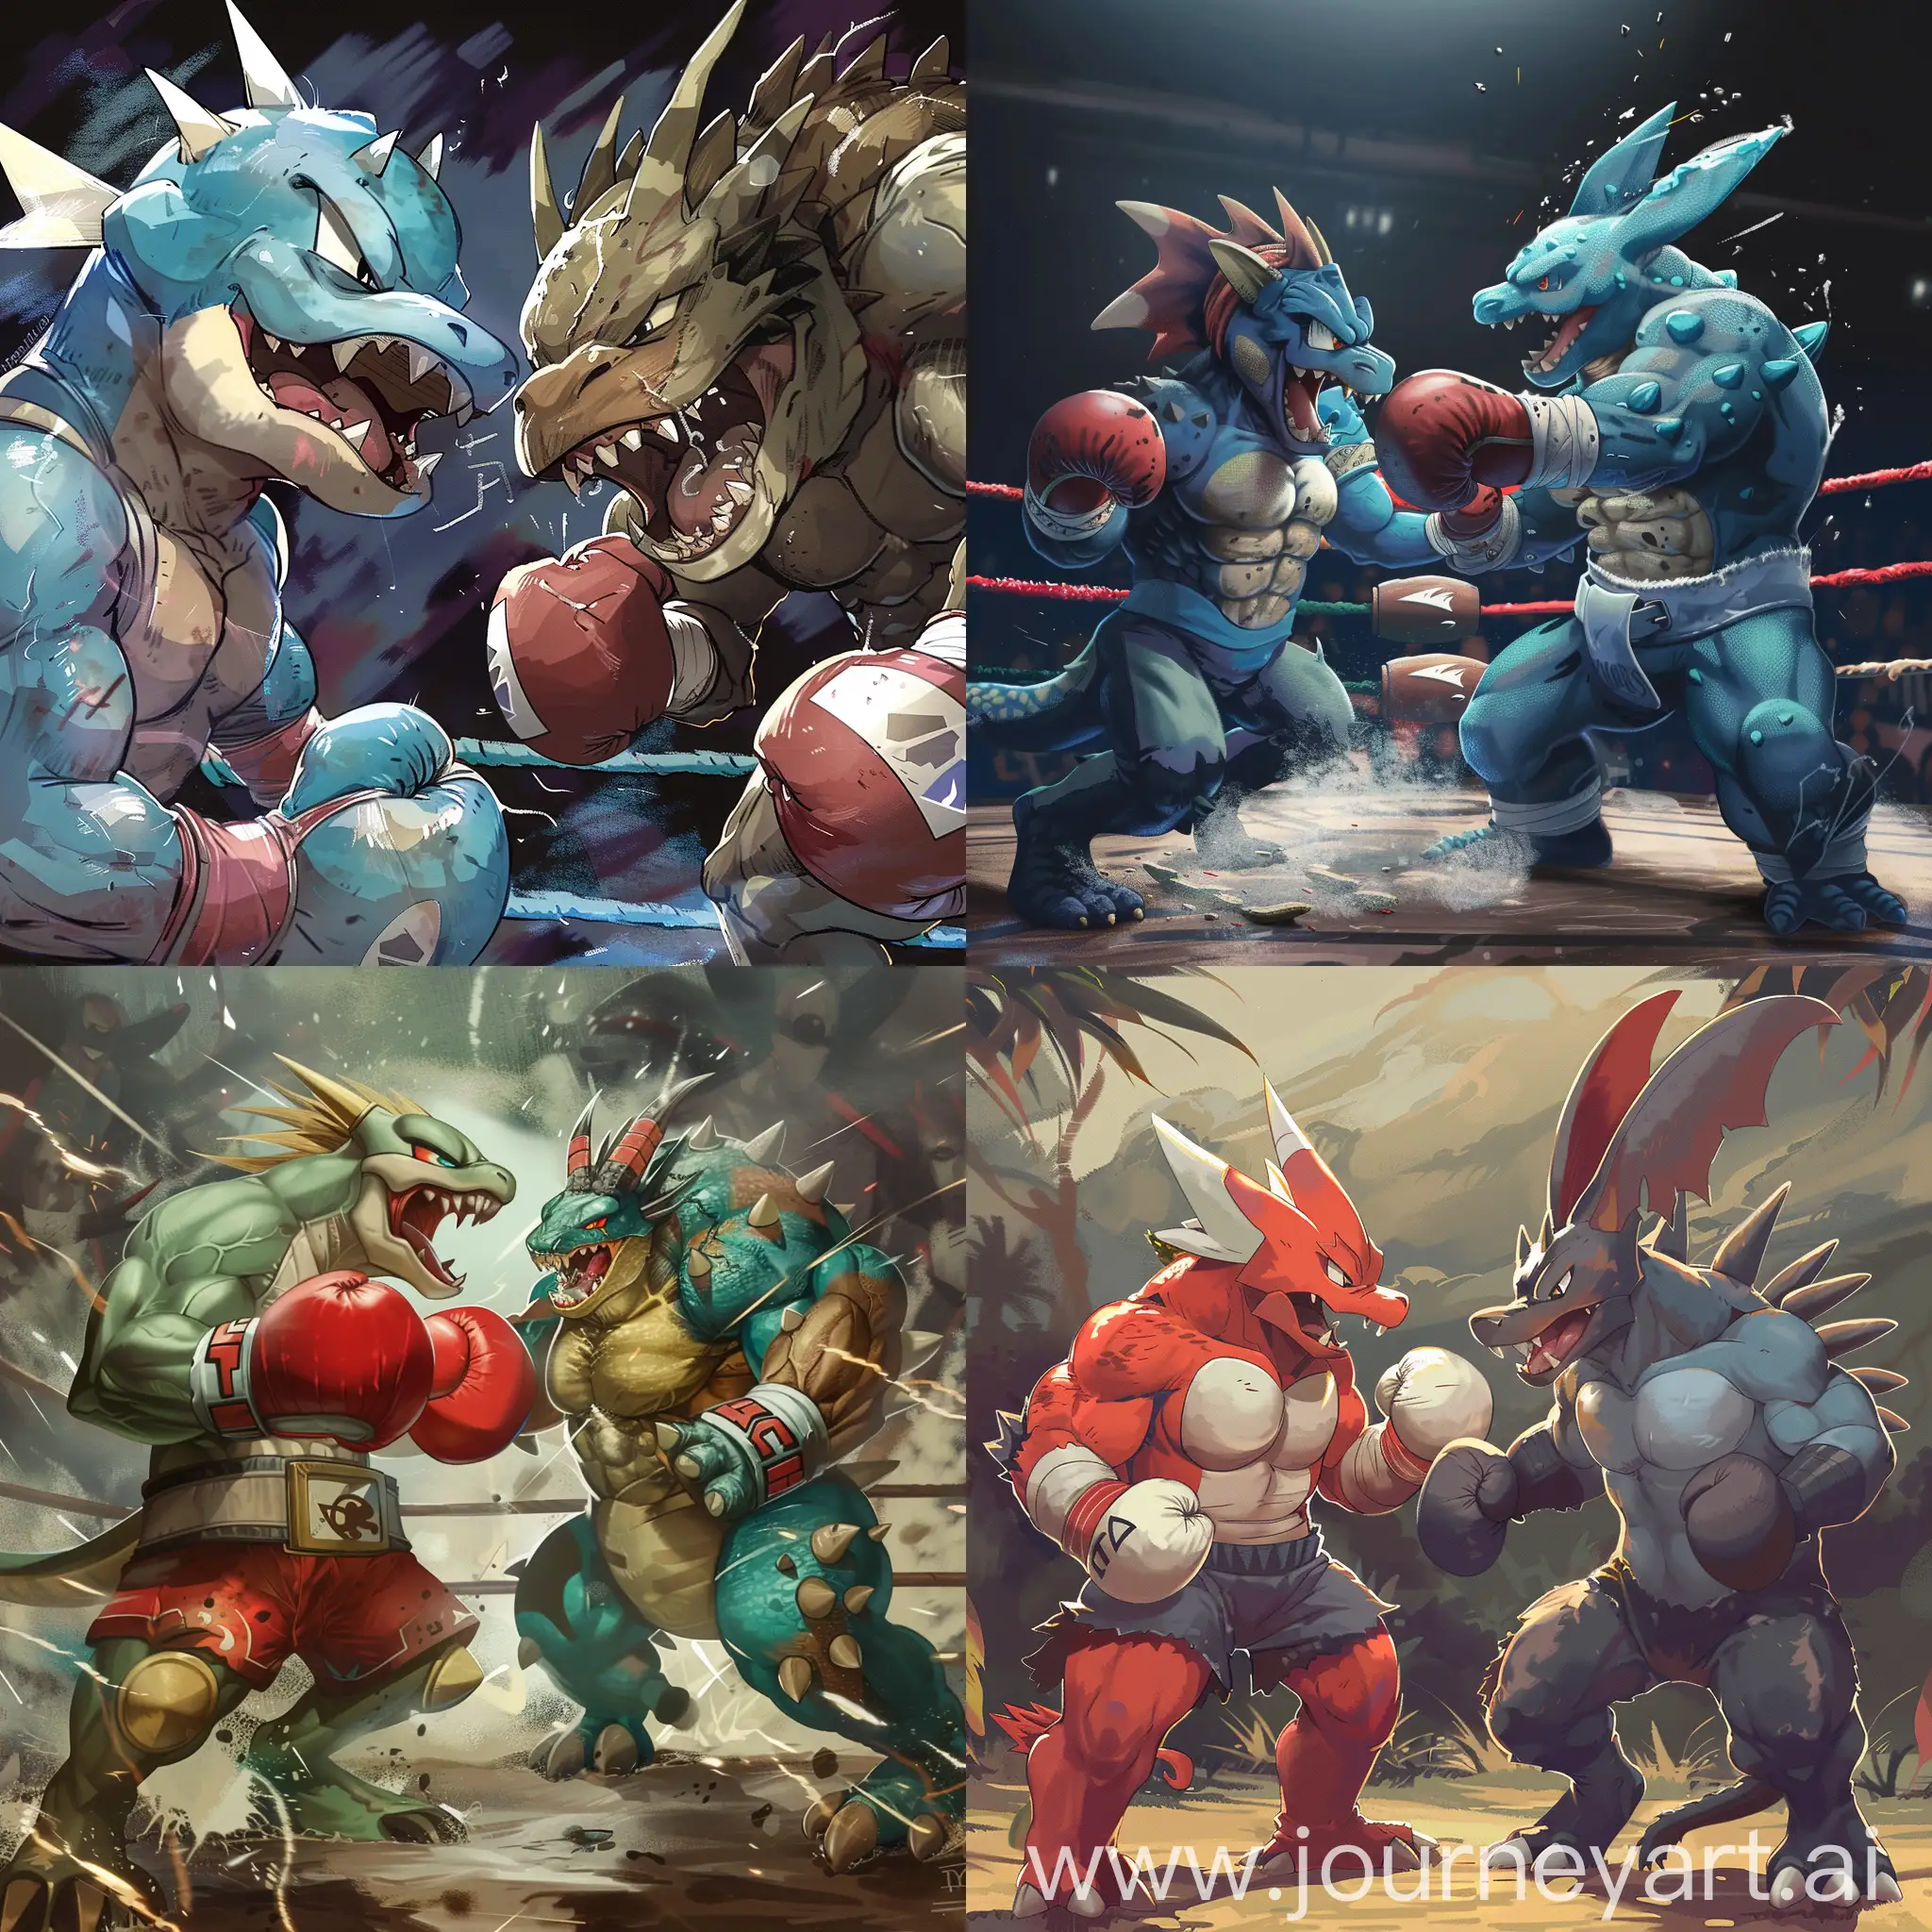 nidoking as a boxer versus tyranitar who is mma fighter
